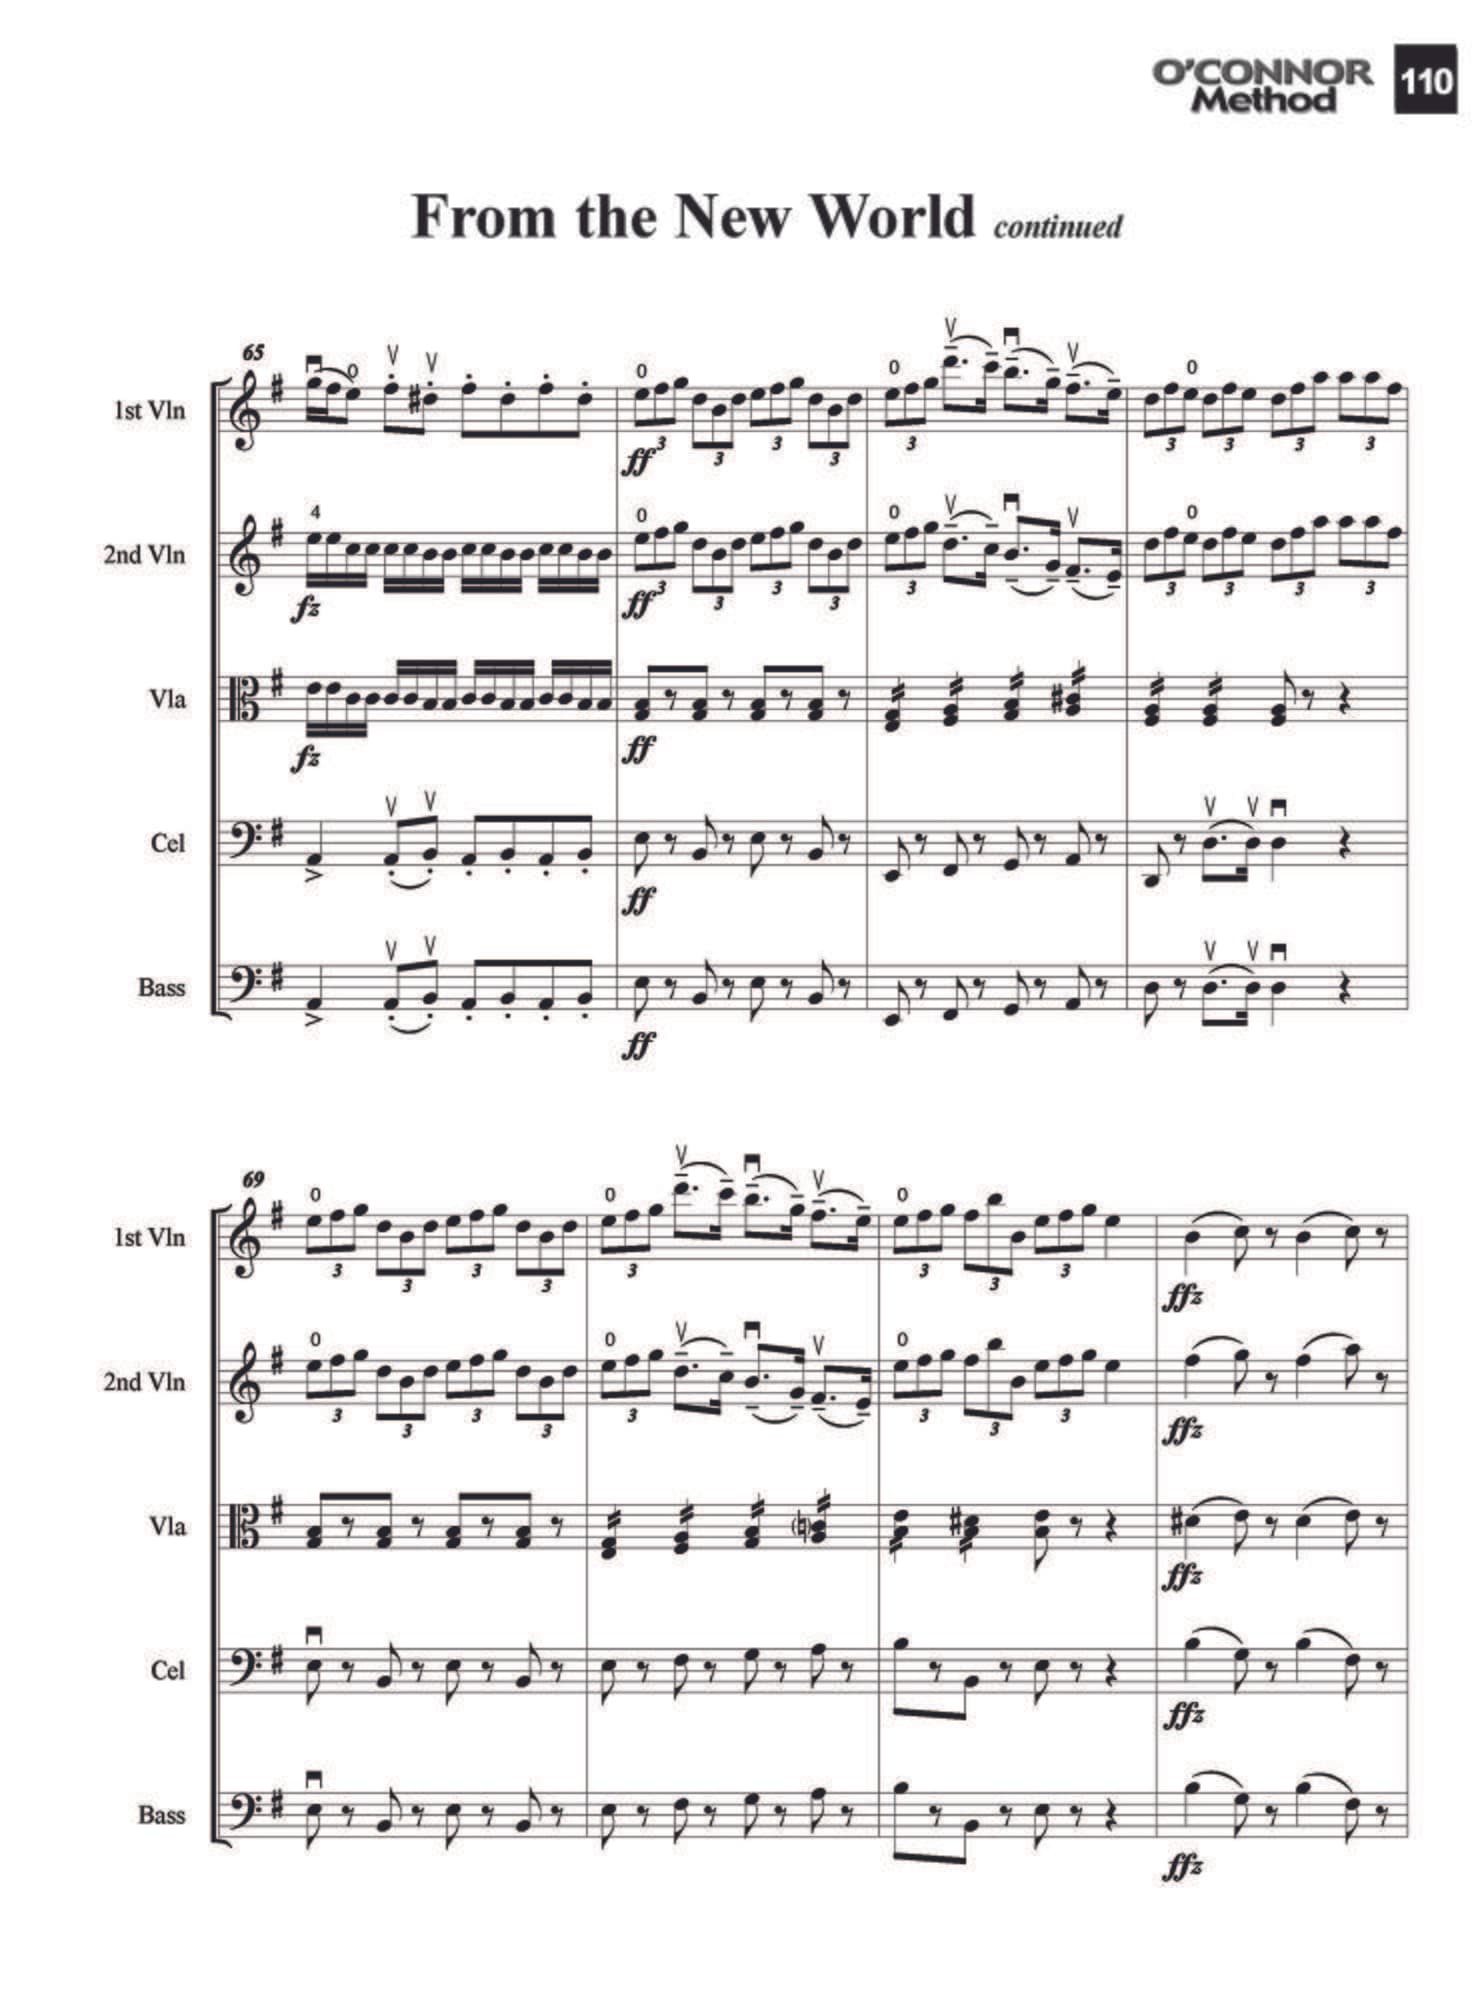 O'Connor Method for Orchestra - Book II - Score - Digital Download